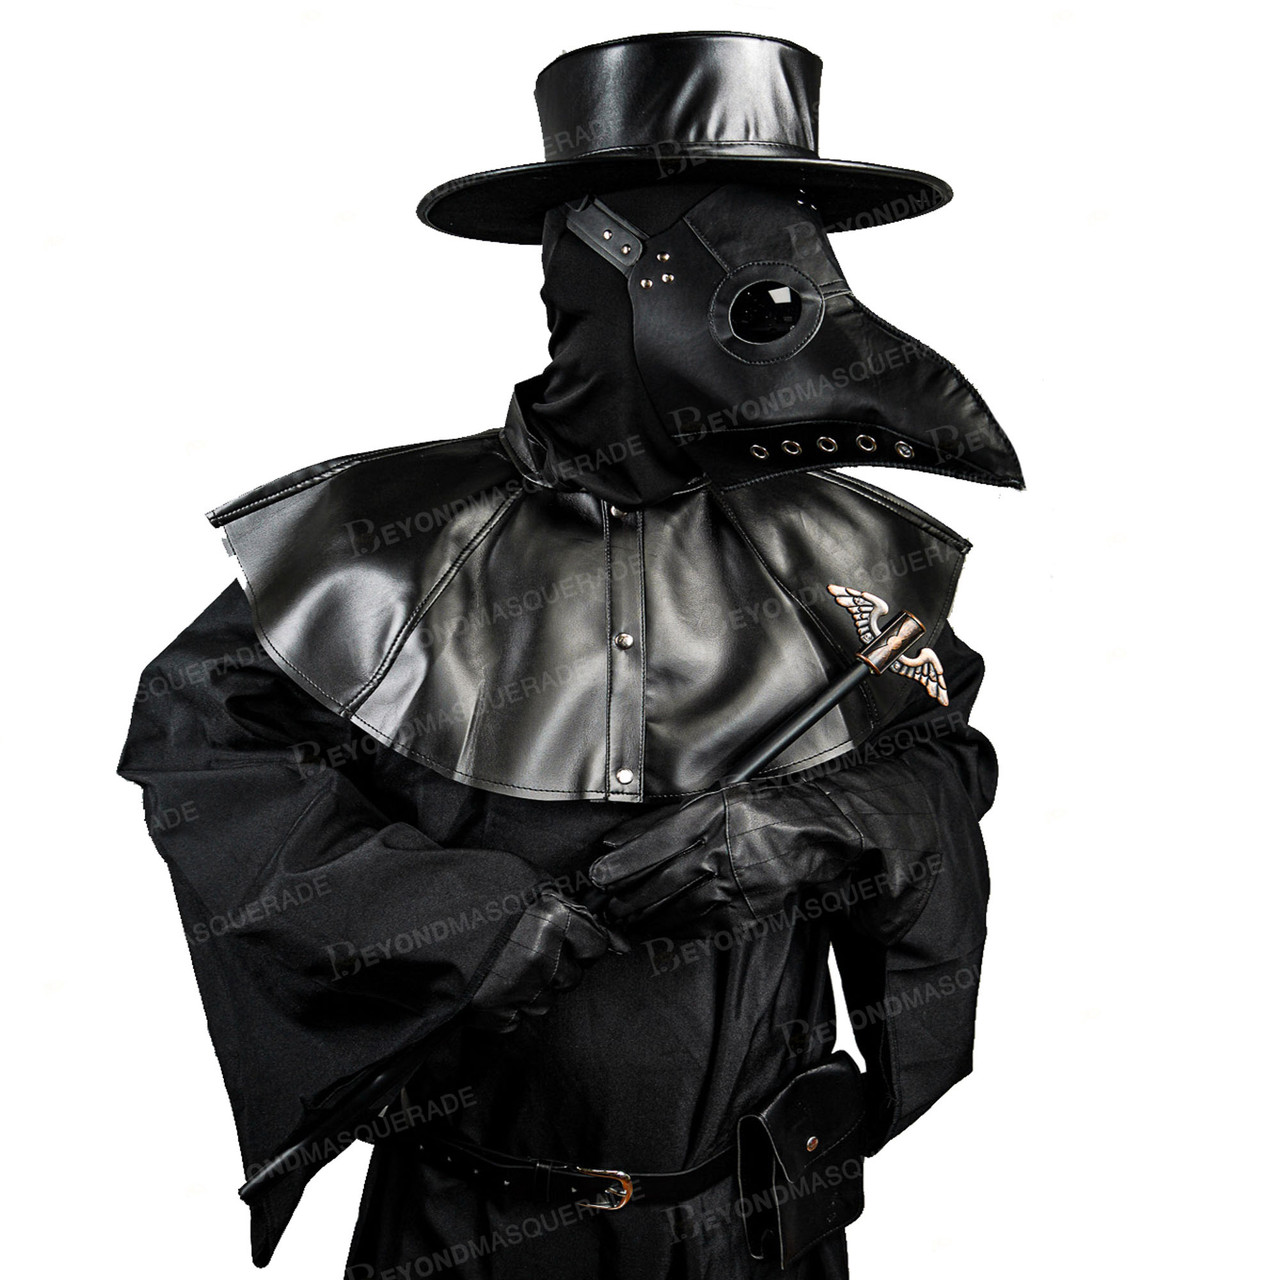 NEW Plague Doctor Costume Mask Dress Hat Cosplay US FREE SHIP